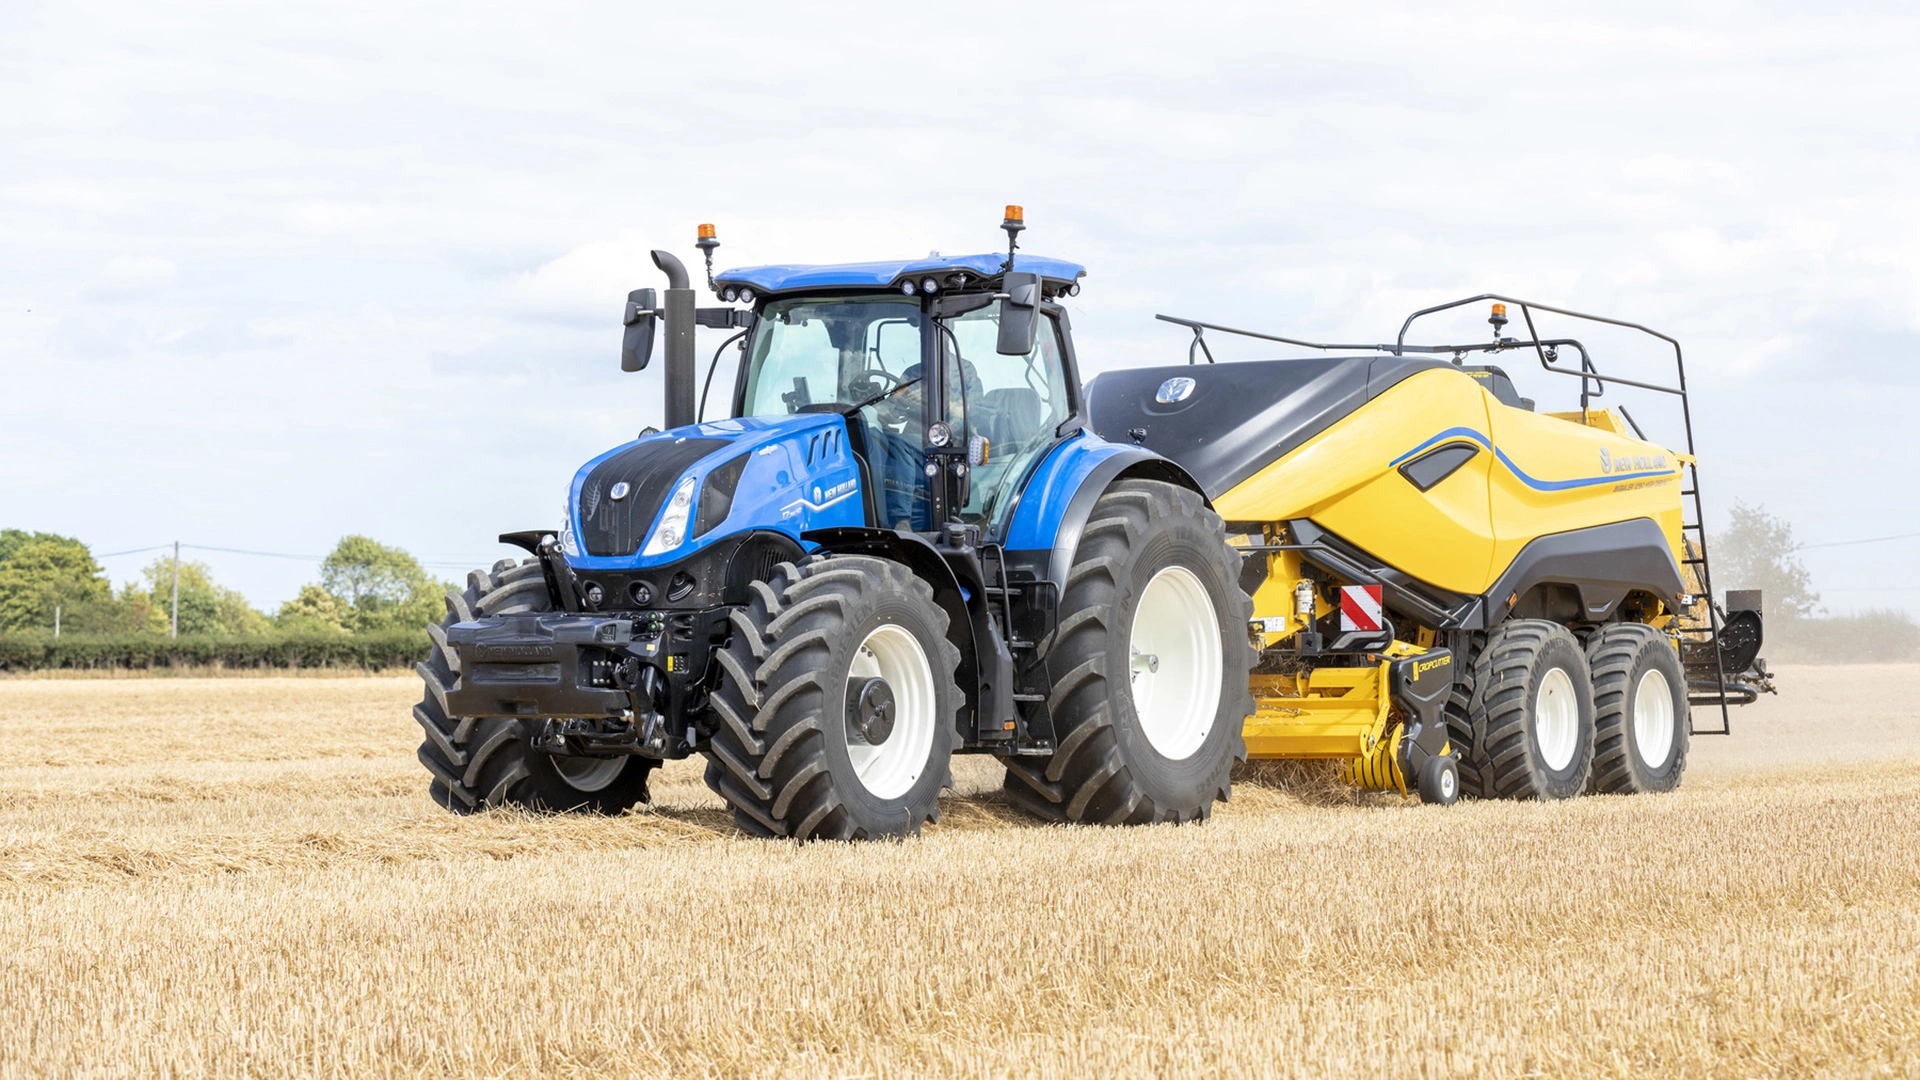 Tractor in action, operating a Bigbaler High Density on an expansive agricultural field